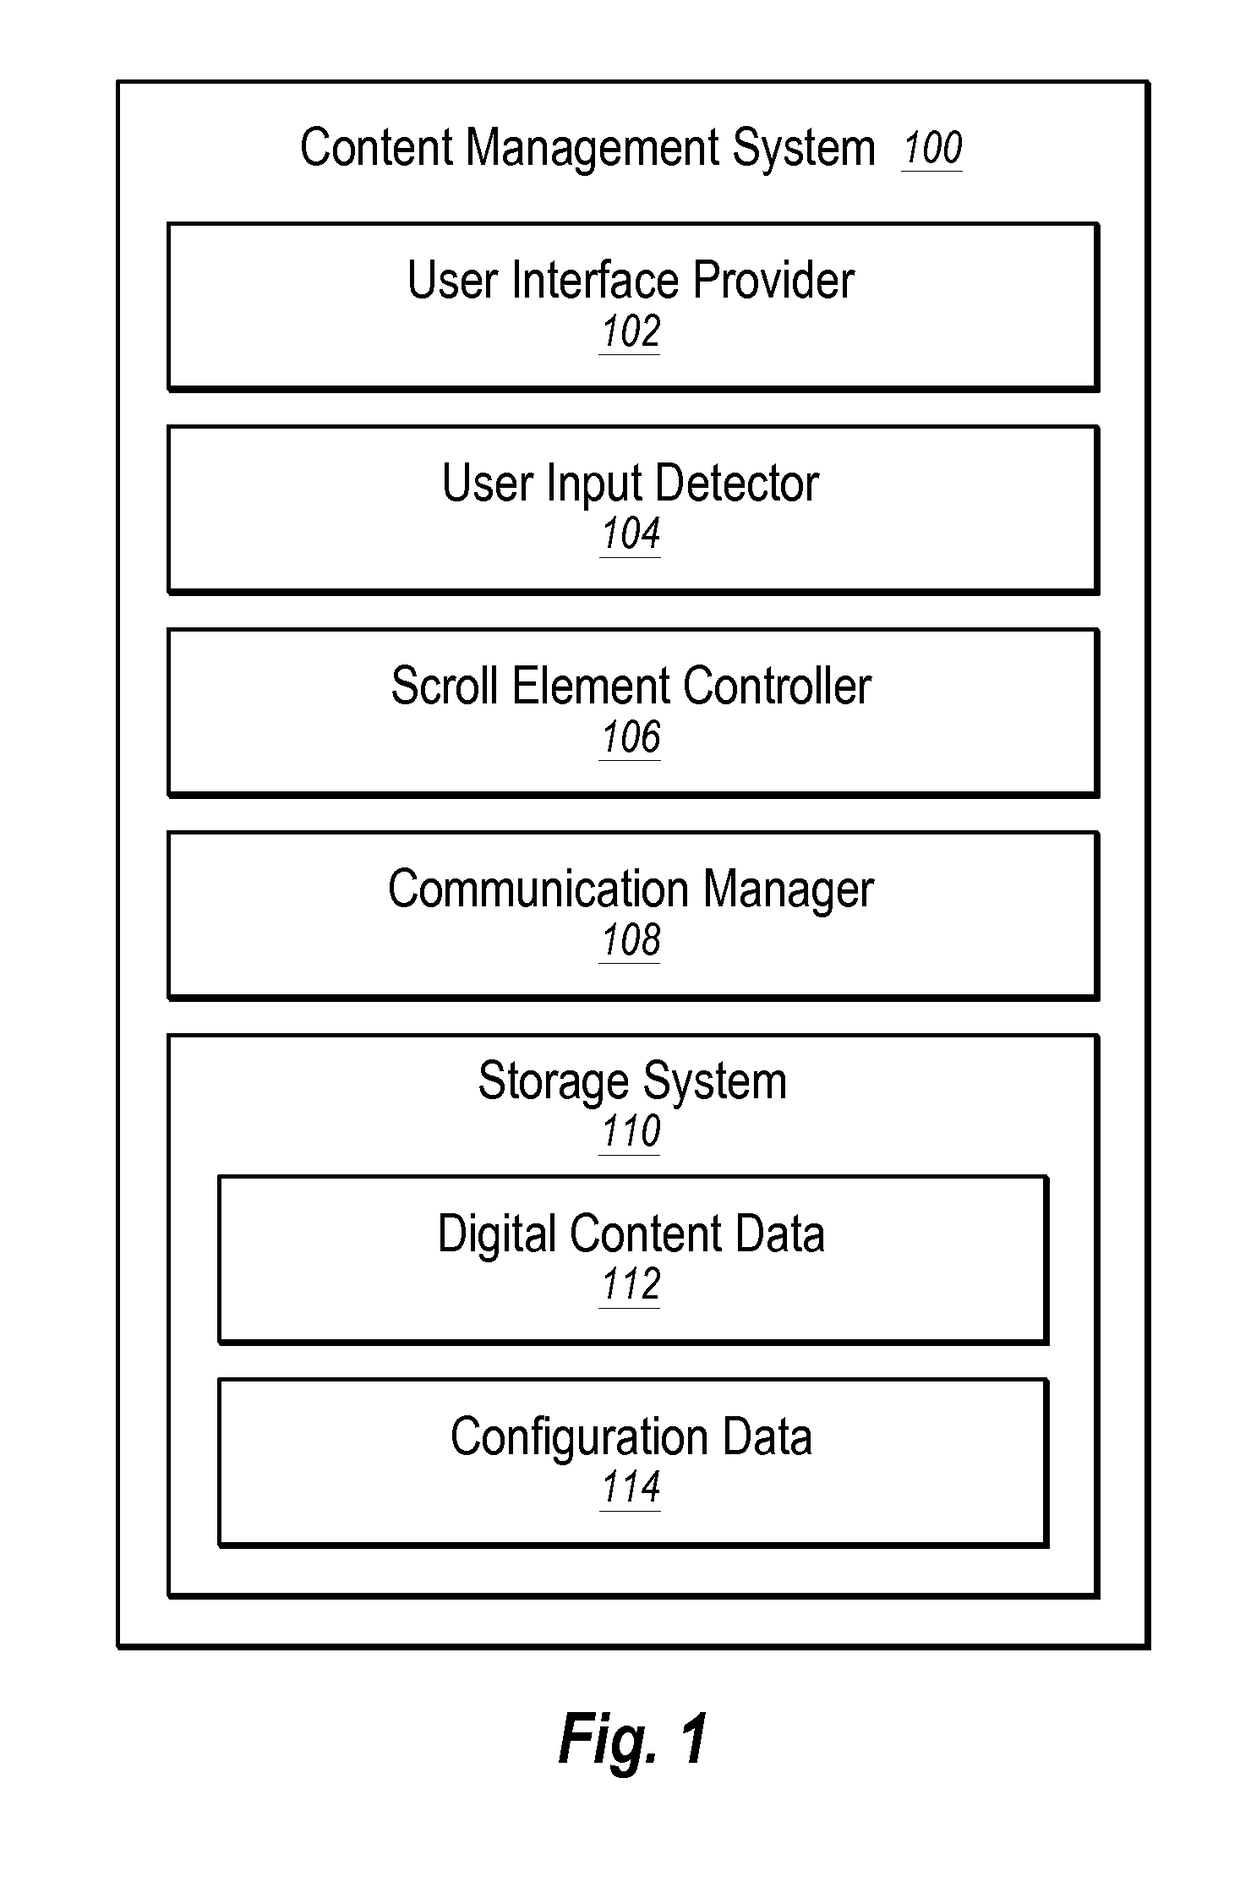 Activating a camera function within a content management application